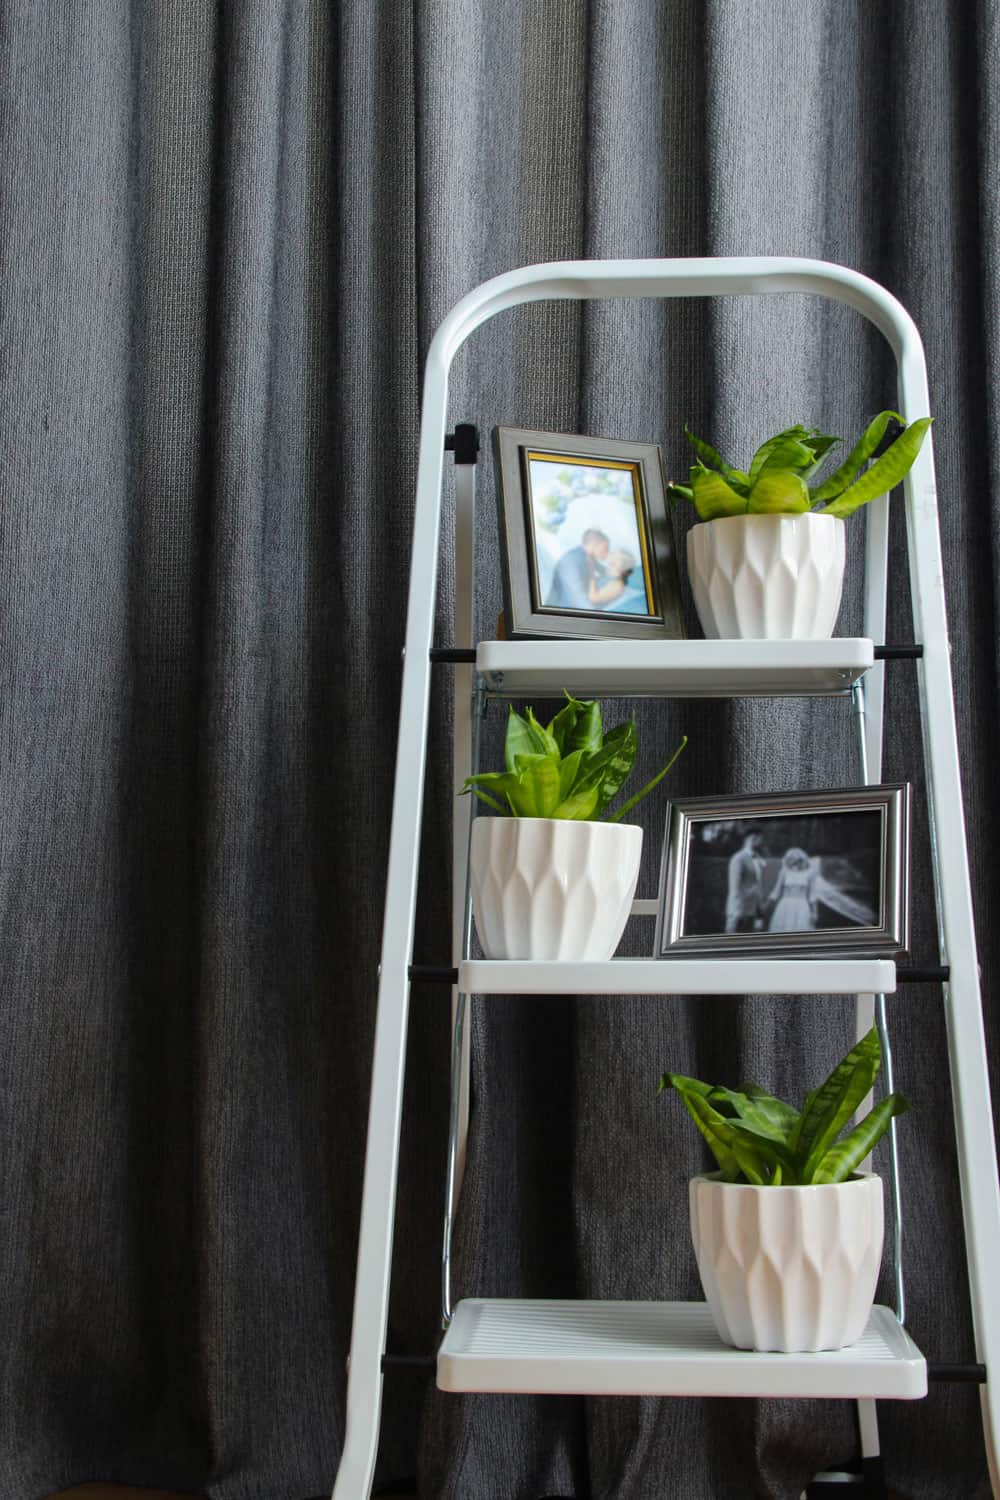 A decorative white ladder that is used as a shelf. White step ladder, home plants, and picture frames in the interior